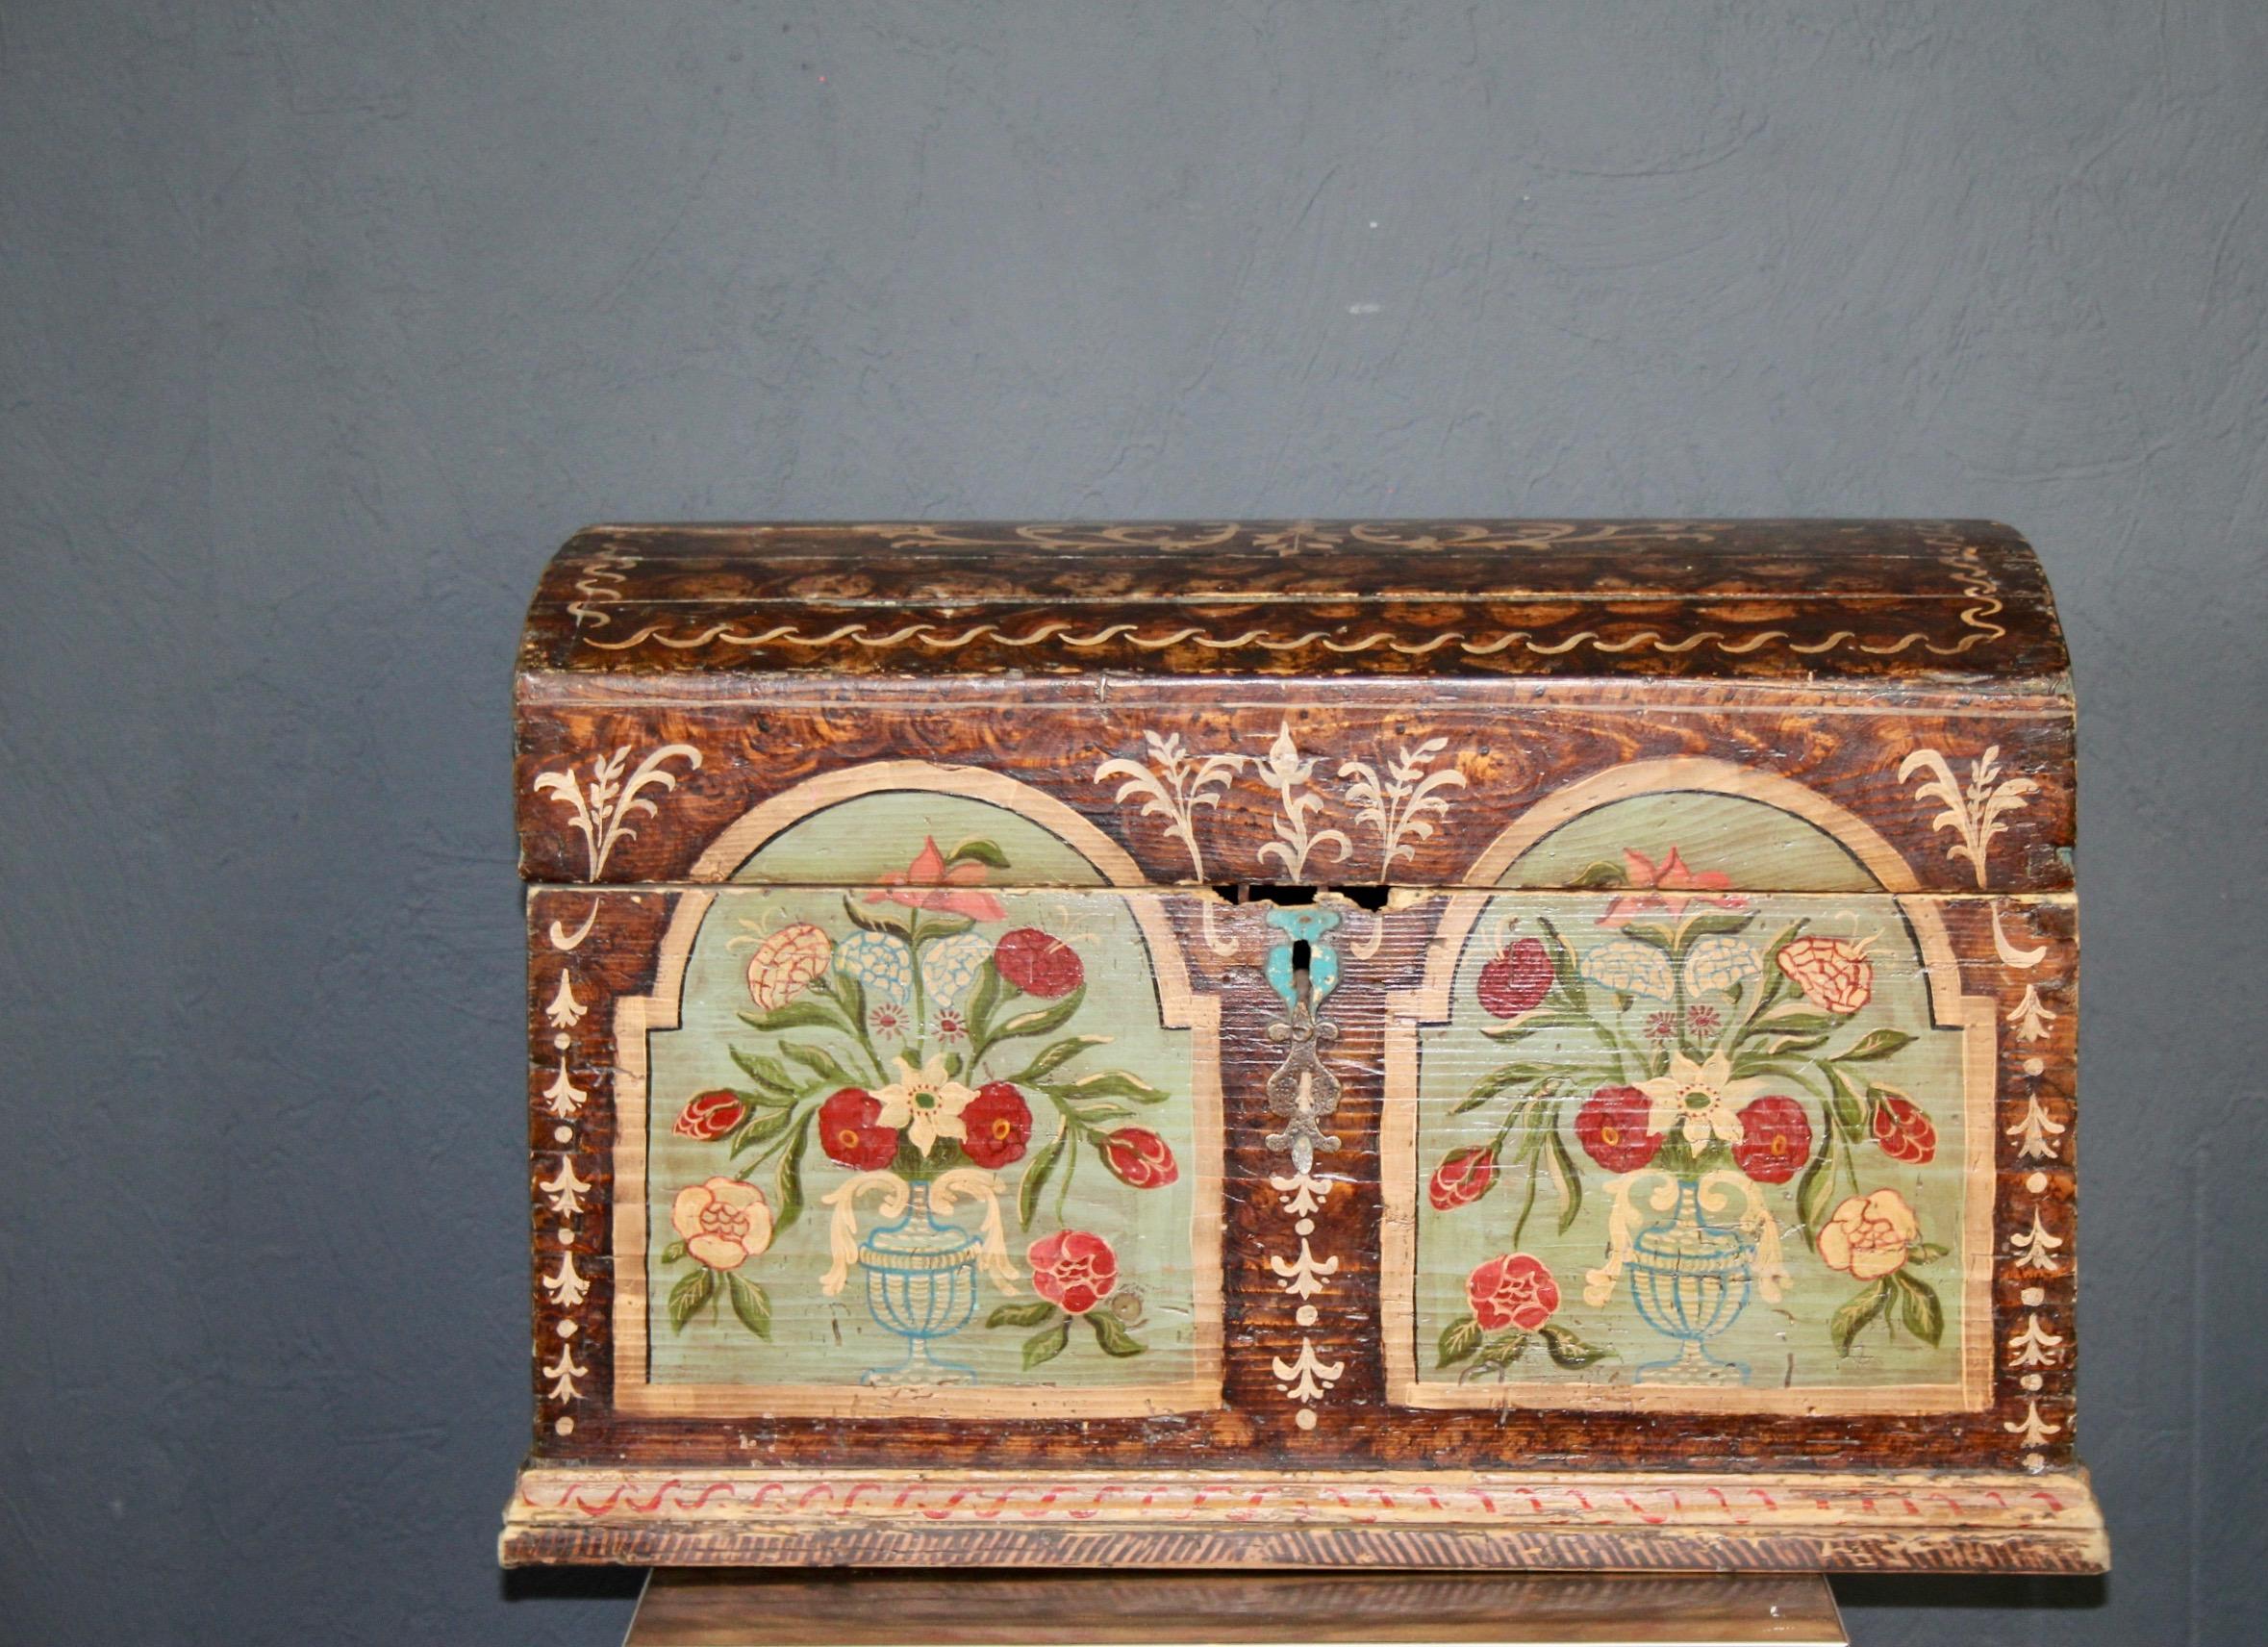 Swiss alp hand painted trunk, with still life flowers, the lock is damage see photo.